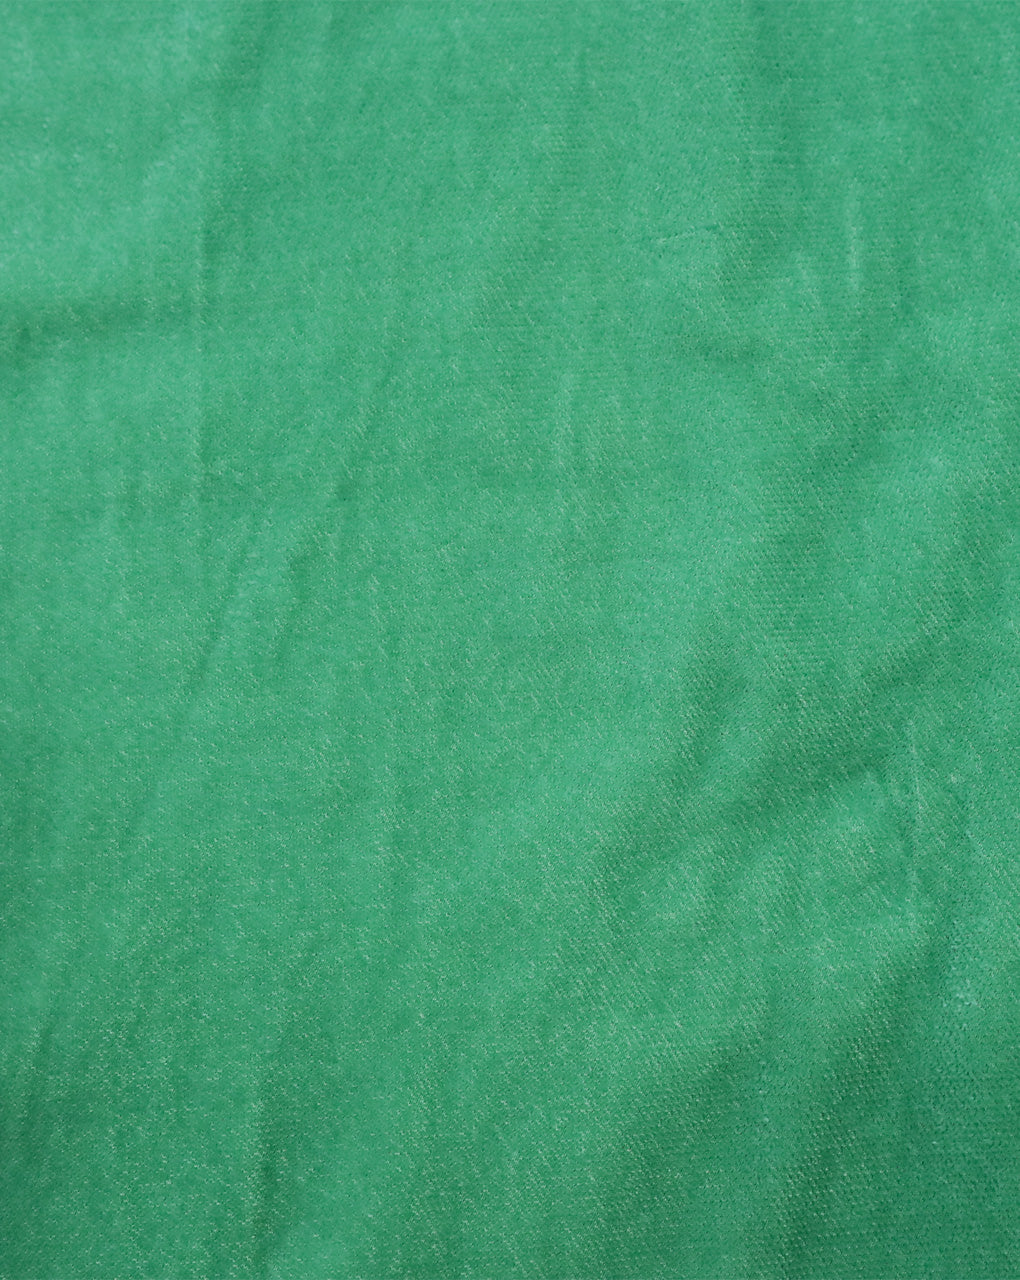 GREEN PLAIN POLYESTER MICRO VELVET FABRIC ( WIDTH 58 INCHES )